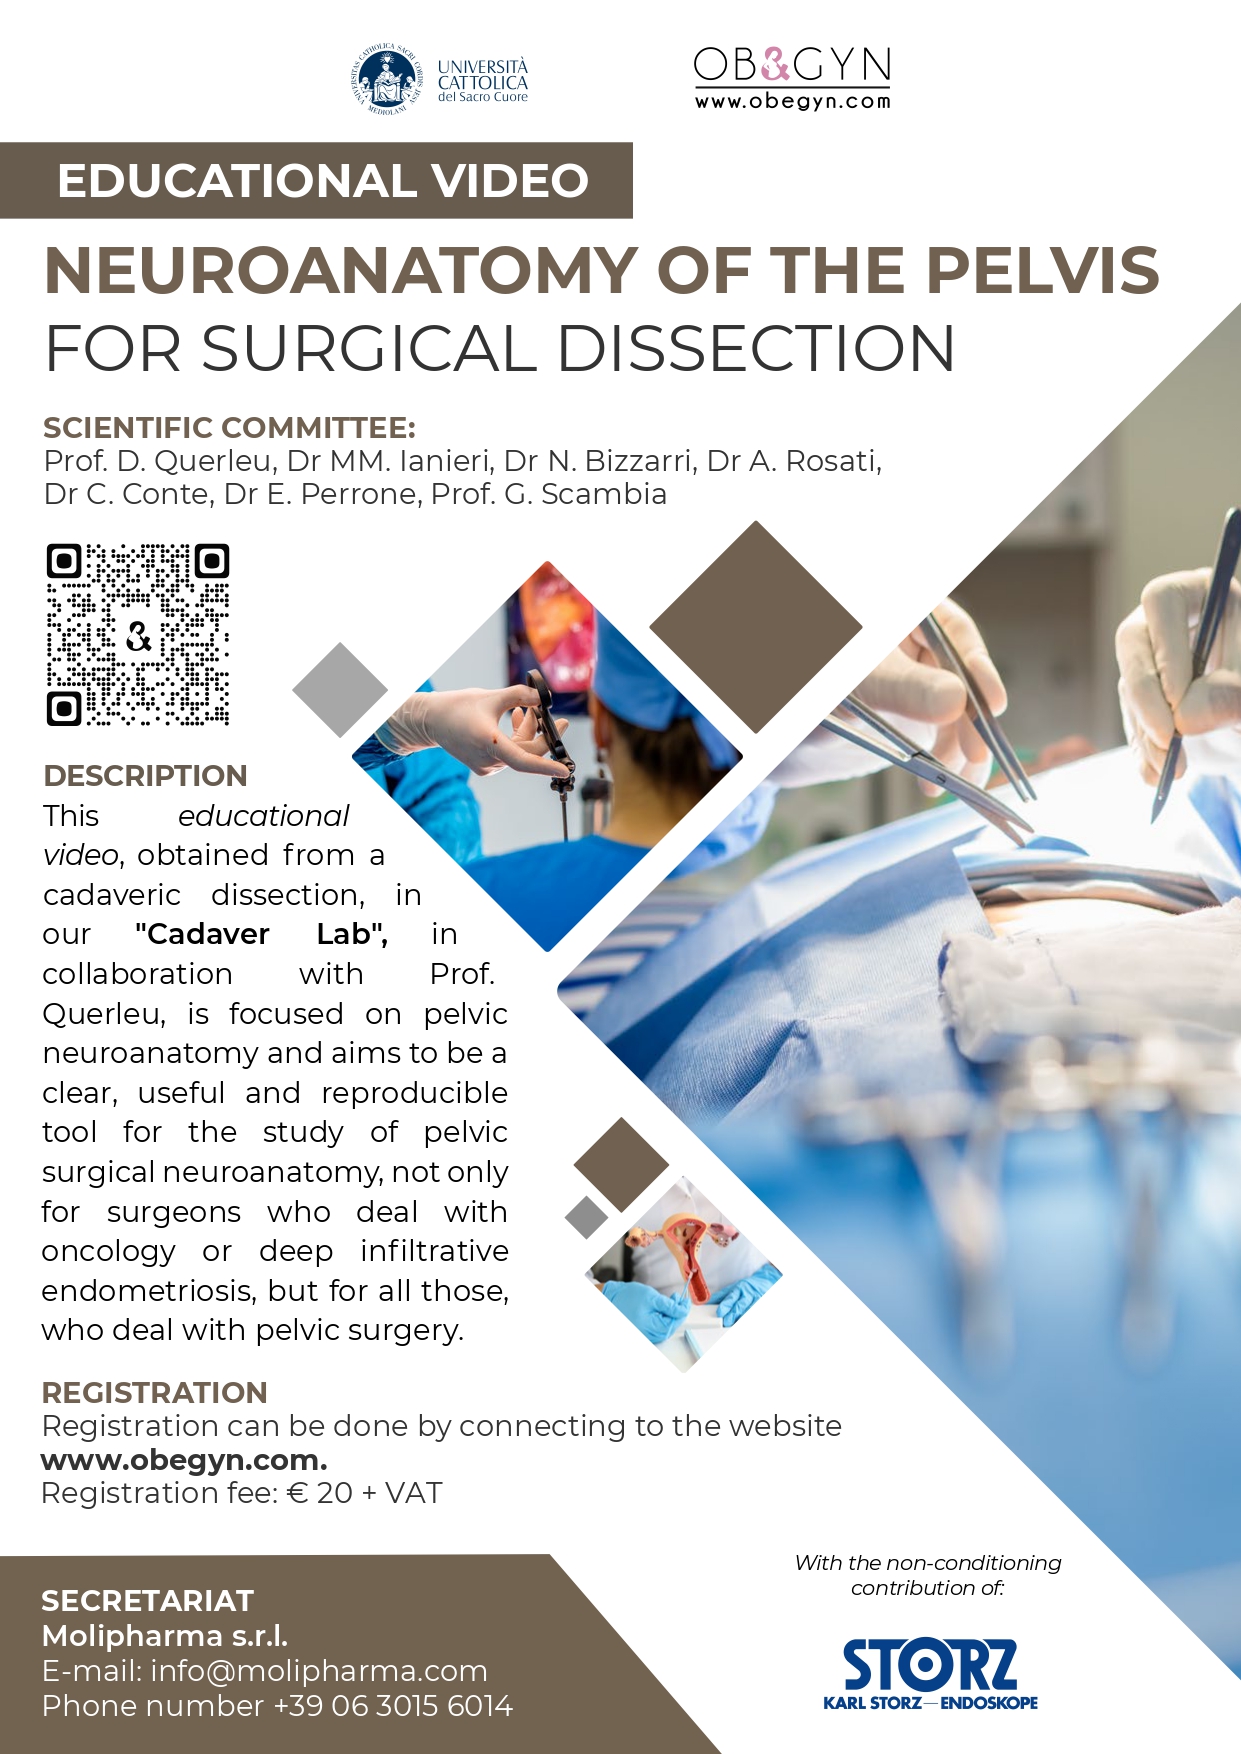 Programma Educational Video: NEUROANATOMY OF THE PELVIS FOR SURGICAL DISSECTION